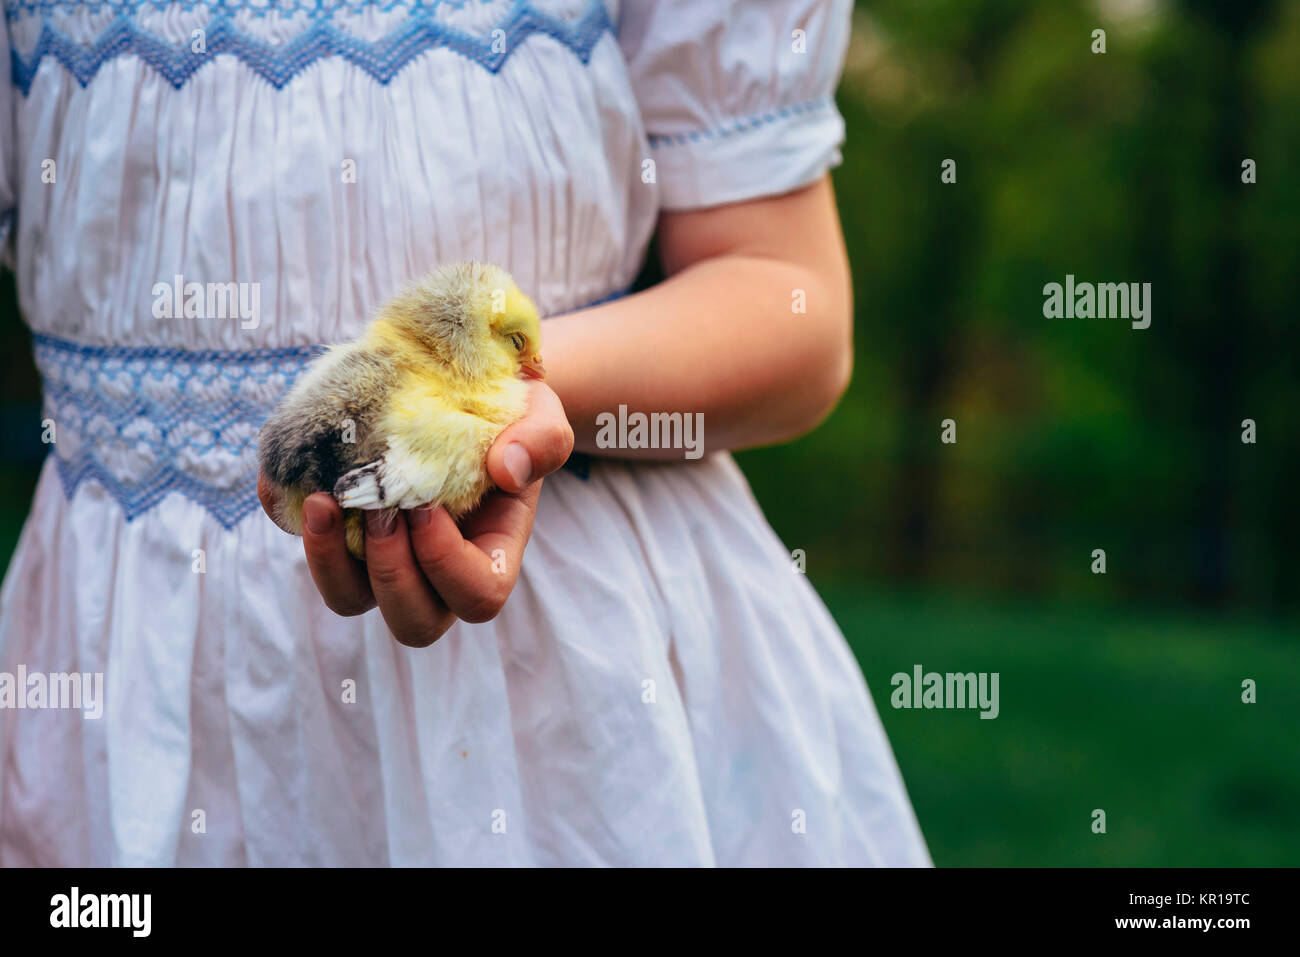 Girl standing in a garden holding a chick Stock Photo